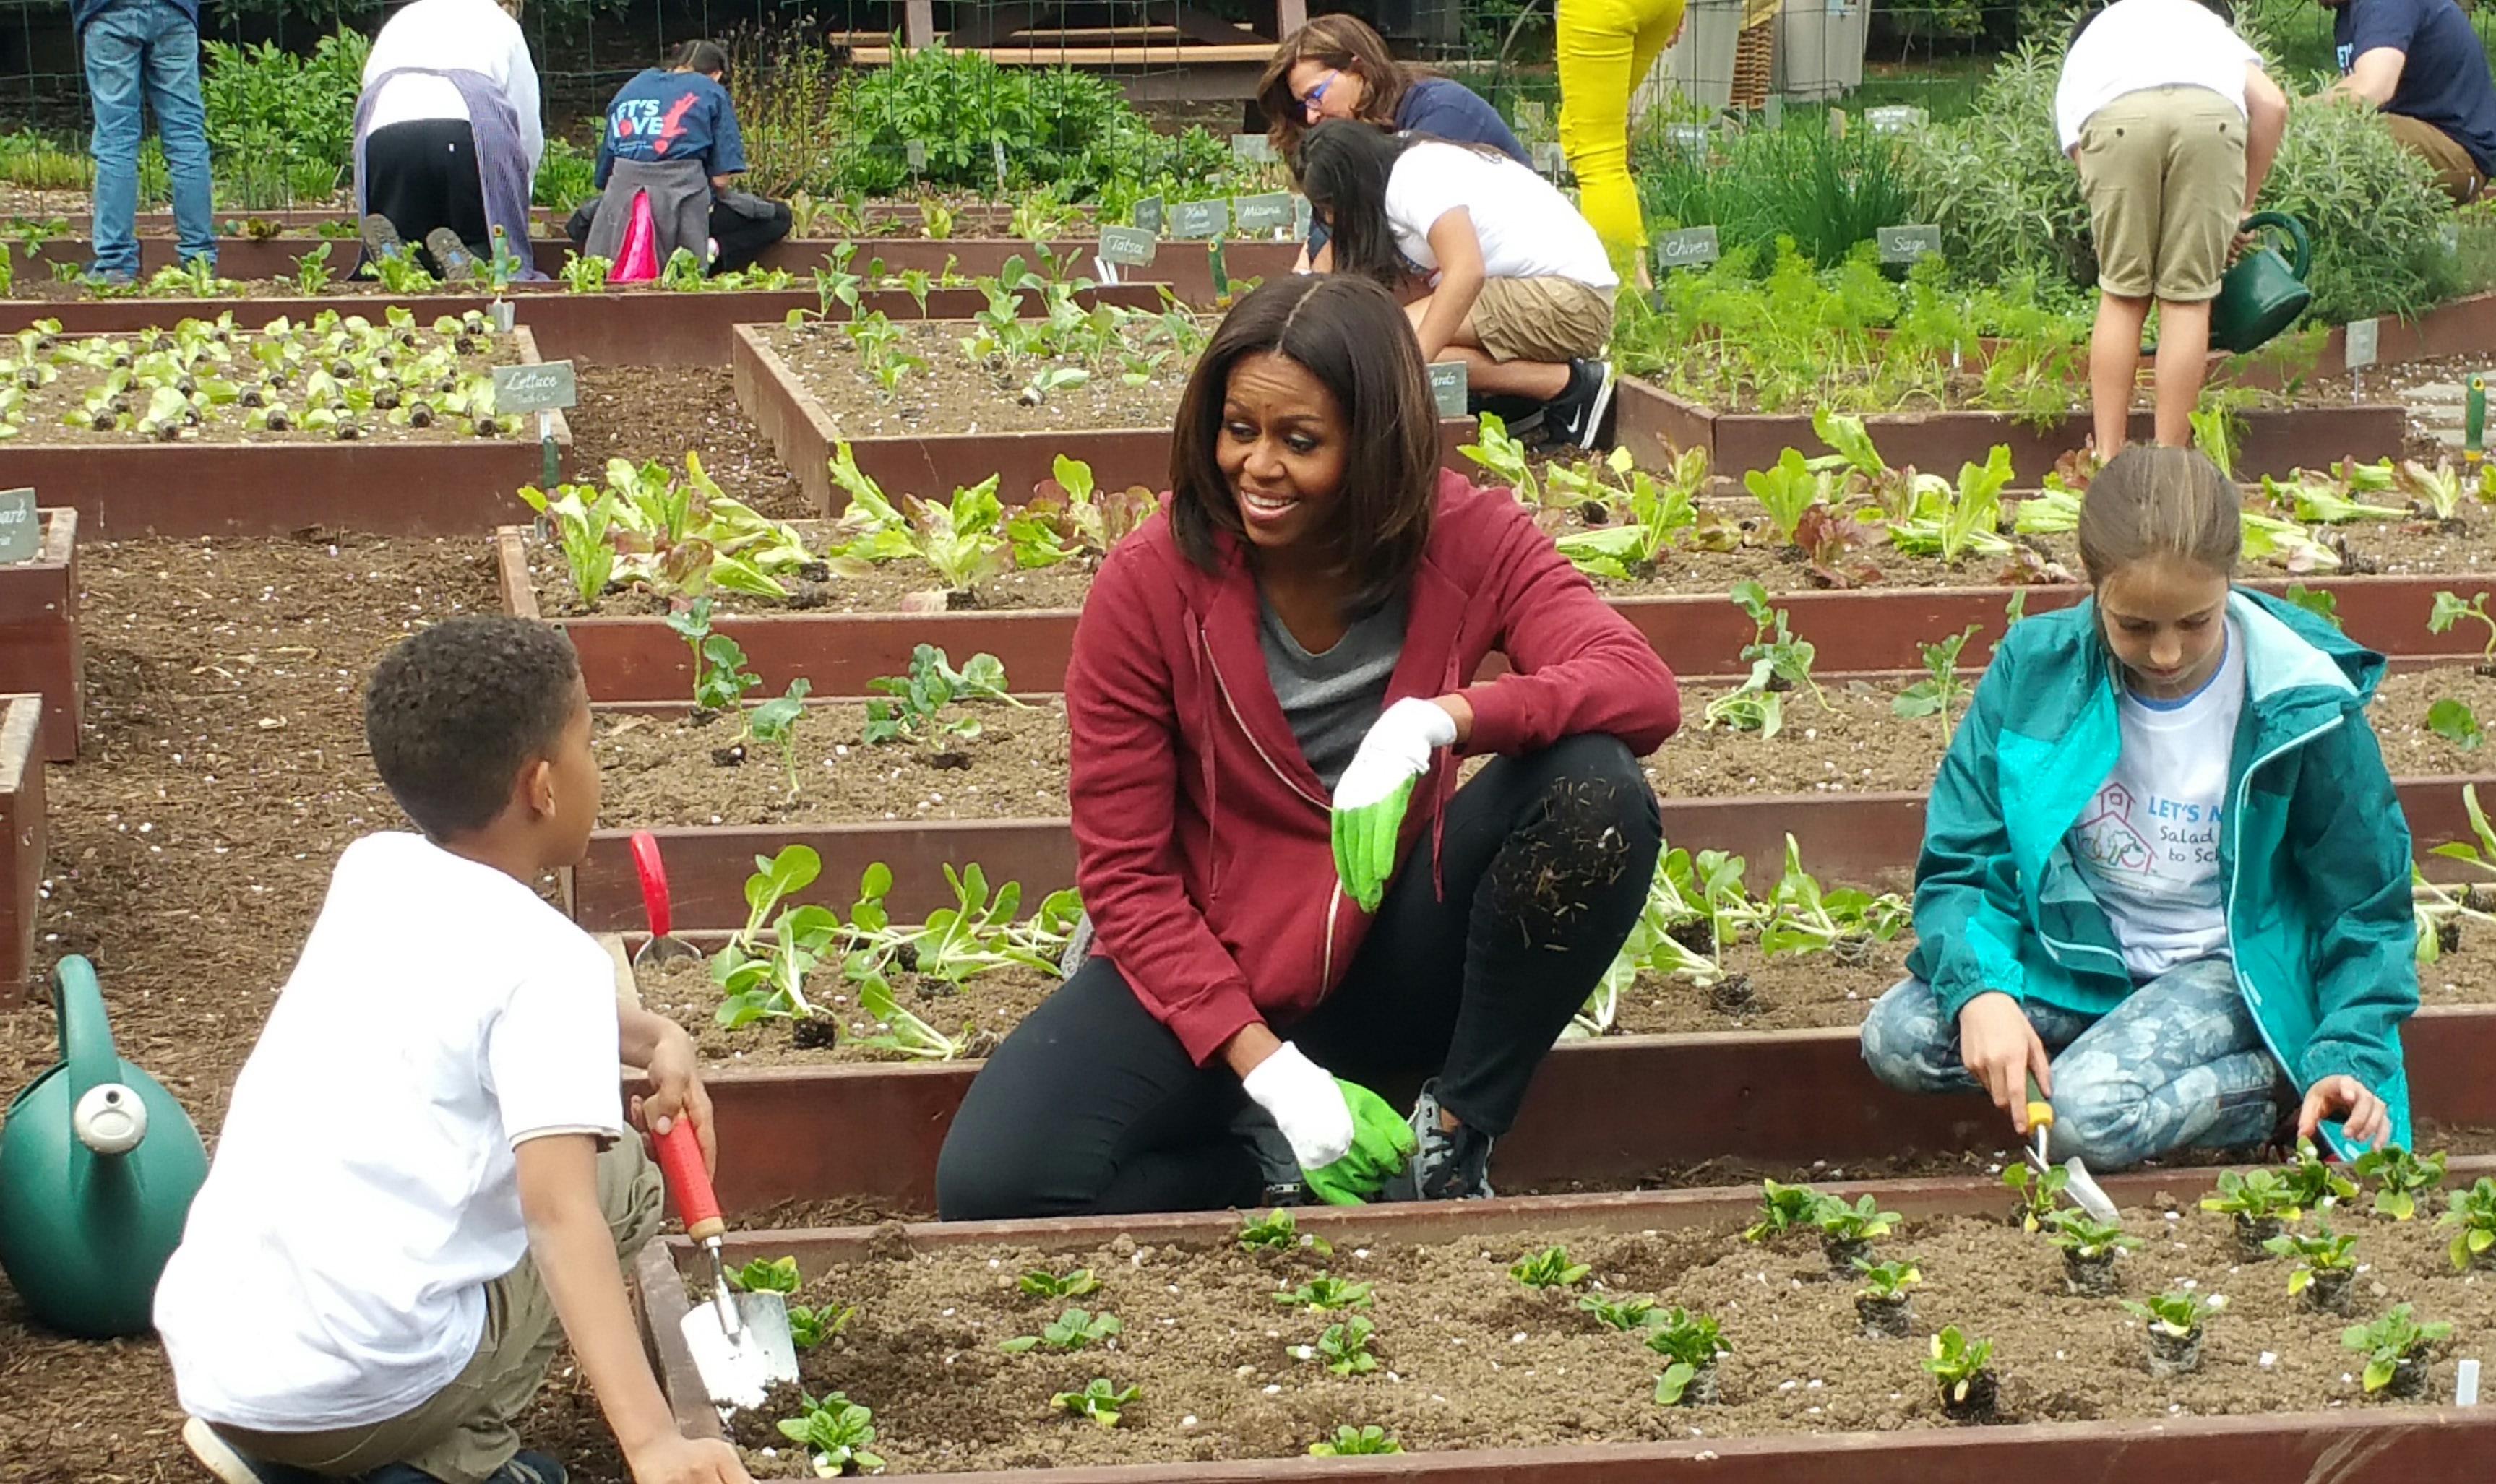 First lady Michelle Obama joins students from across the nation to plant the White House Kitchen Garden on April 15, 2015 (photo credit: Jerome Dorn)